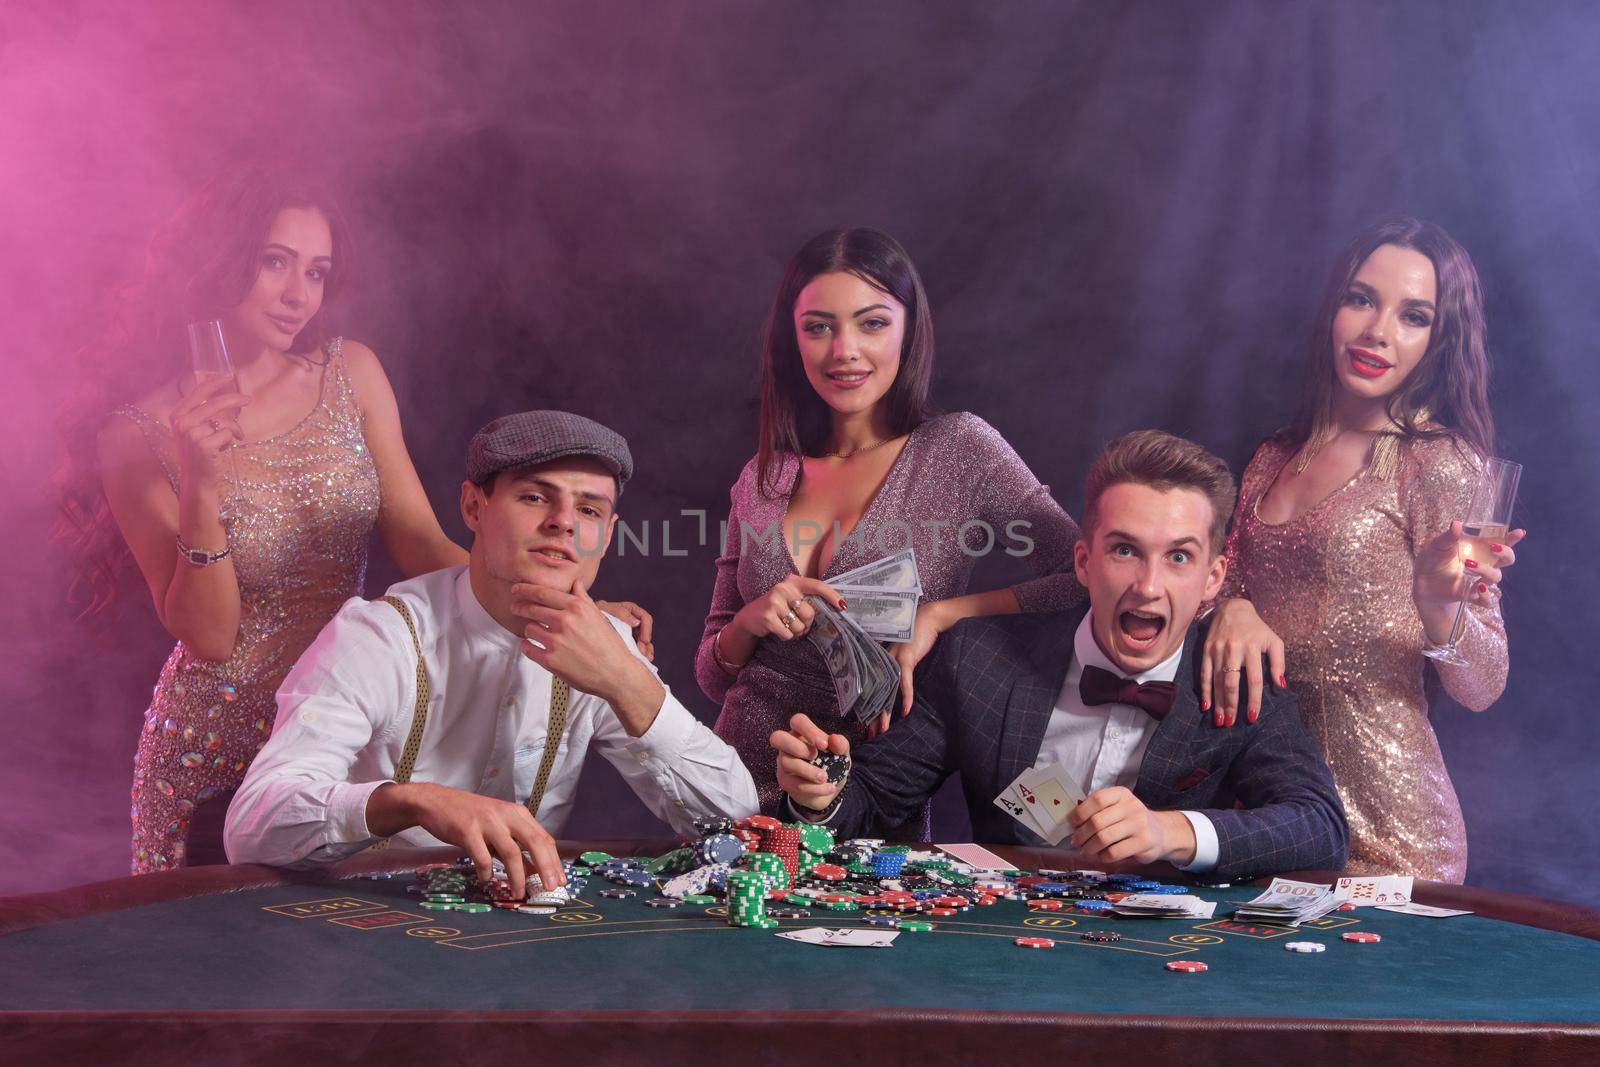 Friends playing poker at casino, at table with stacks of chips, money, cards on it. Celebrating win, smiling. Black, smoke background. Close-up. by nazarovsergey